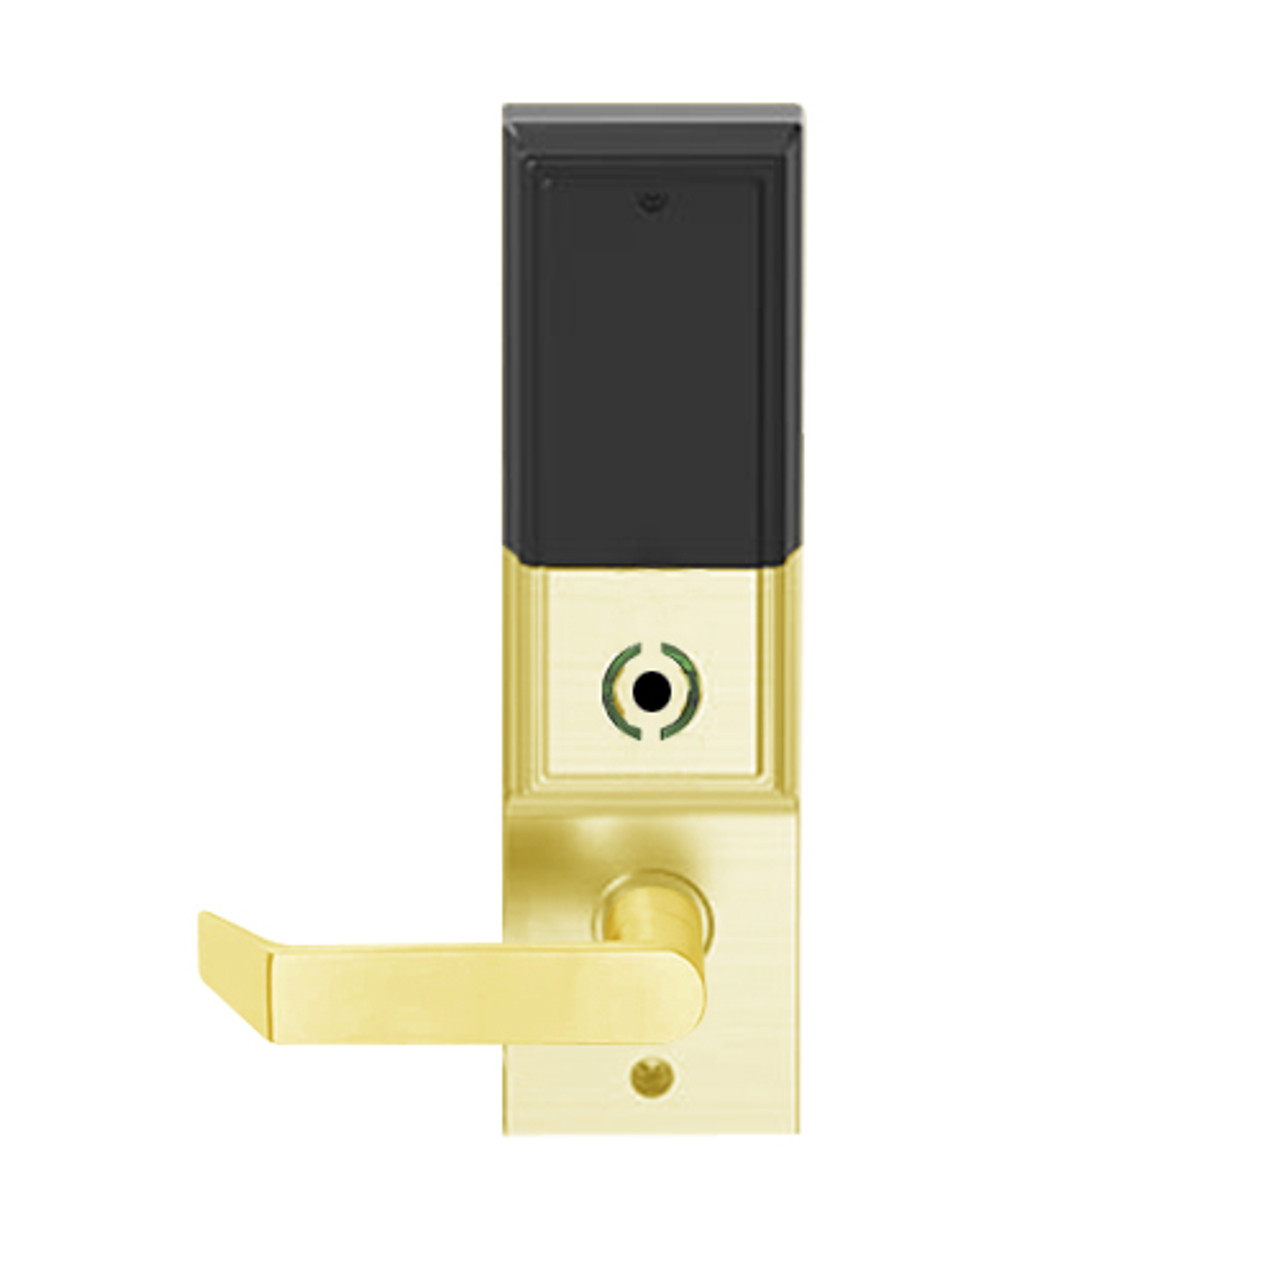 LEMB-ADD-L-06-605 Schlage Less Mortise Cylinder Privacy/Office Wireless Addison Mortise Lock with Push Button, LED and Rhodes Lever in Bright Brass